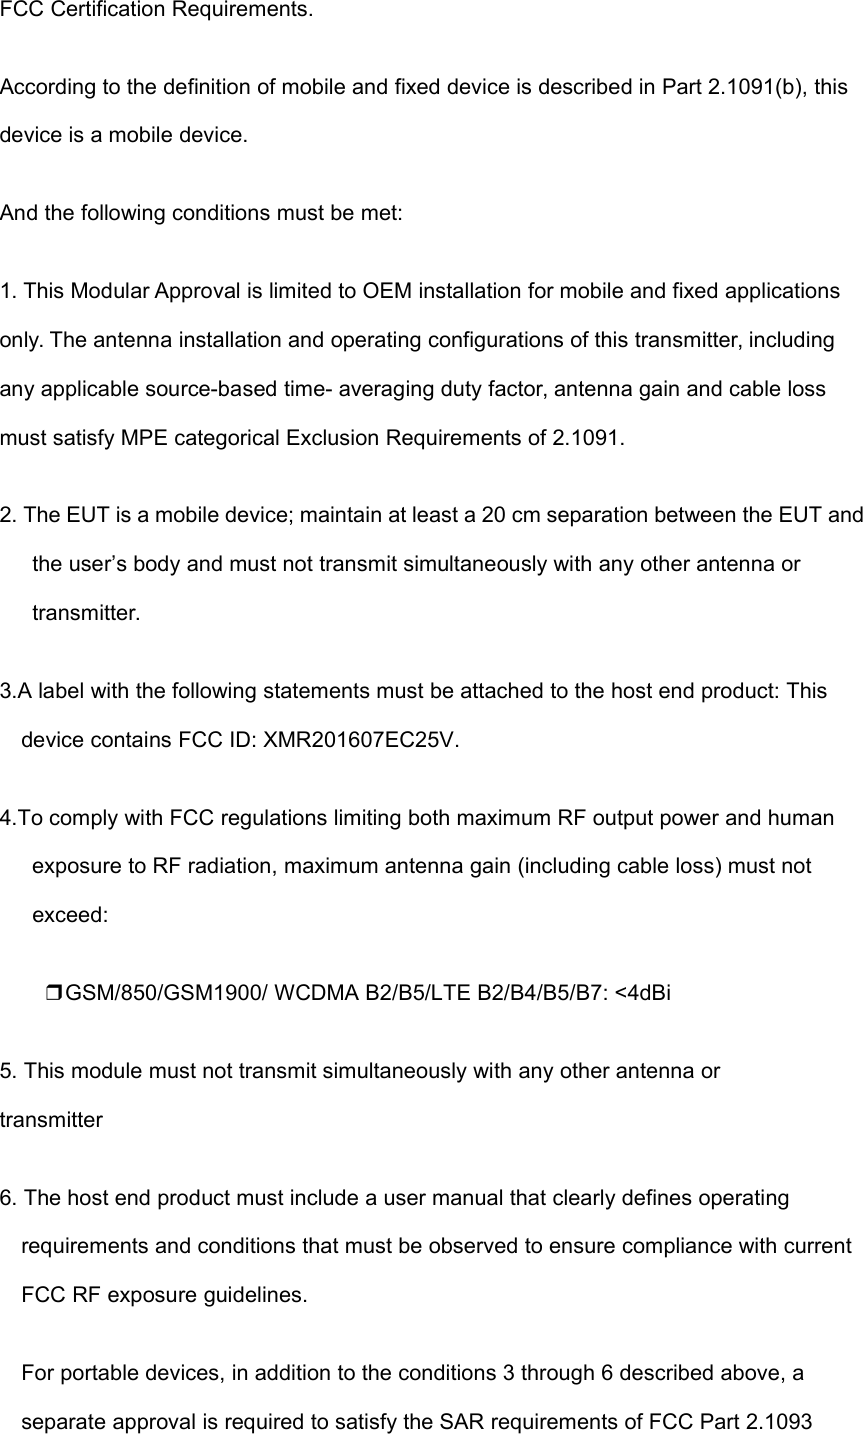 FCC Certification Requirements.According to the definition of mobile and fixed device is described in Part 2.1091(b), thisdevice is a mobile device.And the following conditions must be met:1. This Modular Approval is limited to OEM installation for mobile and fixed applicationsonly. The antenna installation and operating configurations of this transmitter, includingany applicable source-based time- averaging duty factor, antenna gain and cable lossmust satisfy MPE categorical Exclusion Requirements of 2.1091.2. The EUT is a mobile device; maintain at least a 20 cm separation between the EUT andthe user’s body and must not transmit simultaneously with any other antenna ortransmitter.3.A label with the following statements must be attached to the host end product: Thisdevice contains FCC ID: XMR201607EC25V.4.To comply with FCC regulations limiting both maximum RF output power and humanexposure to RF radiation, maximum antenna gain (including cable loss) must notexceed:❒GSM/850/GSM1900/ WCDMA B2/B5/LTE B2/B4/B5/B7: &lt;4dBi5. This module must not transmit simultaneously with any other antenna ortransmitter6. The host end product must include a user manual that clearly defines operatingrequirements and conditions that must be observed to ensure compliance with currentFCC RF exposure guidelines.For portable devices, in addition to the conditions 3 through 6 described above, aseparate approval is required to satisfy the SAR requirements of FCC Part 2.1093